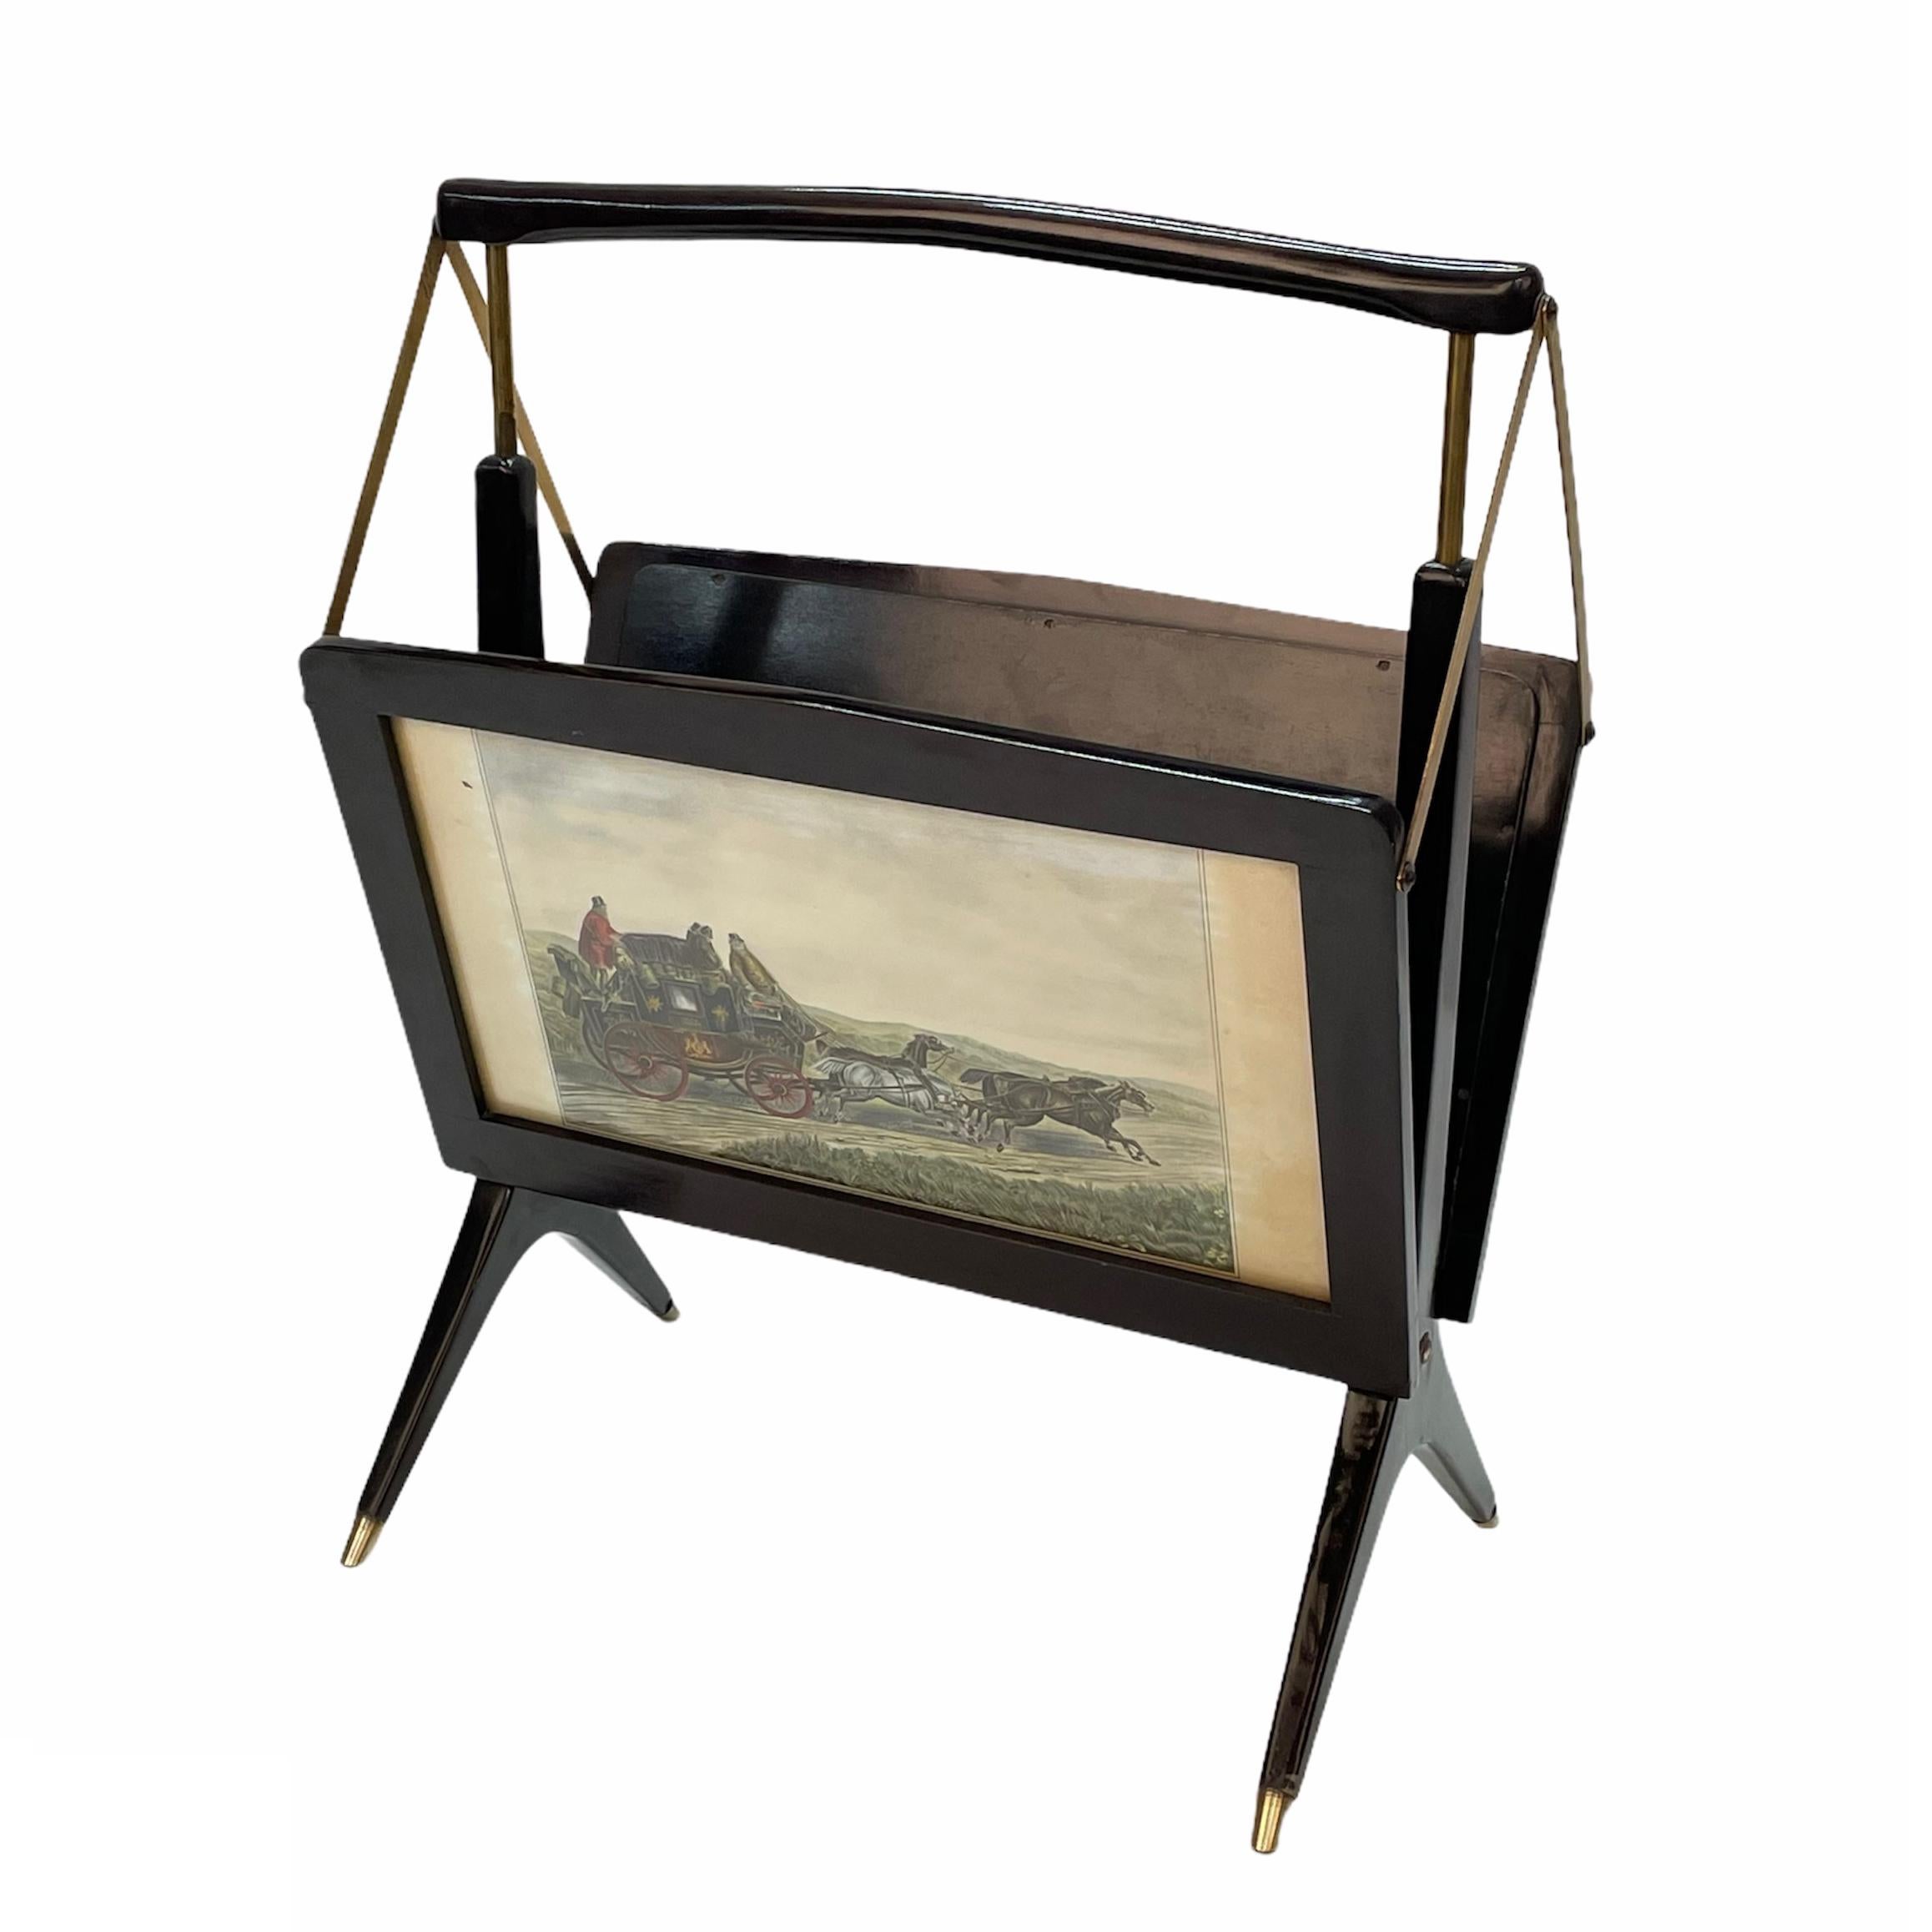 Midcentury Cesare Lacca Wood and Brass Italian Foldable Magazine Rack, 1950s For Sale 4